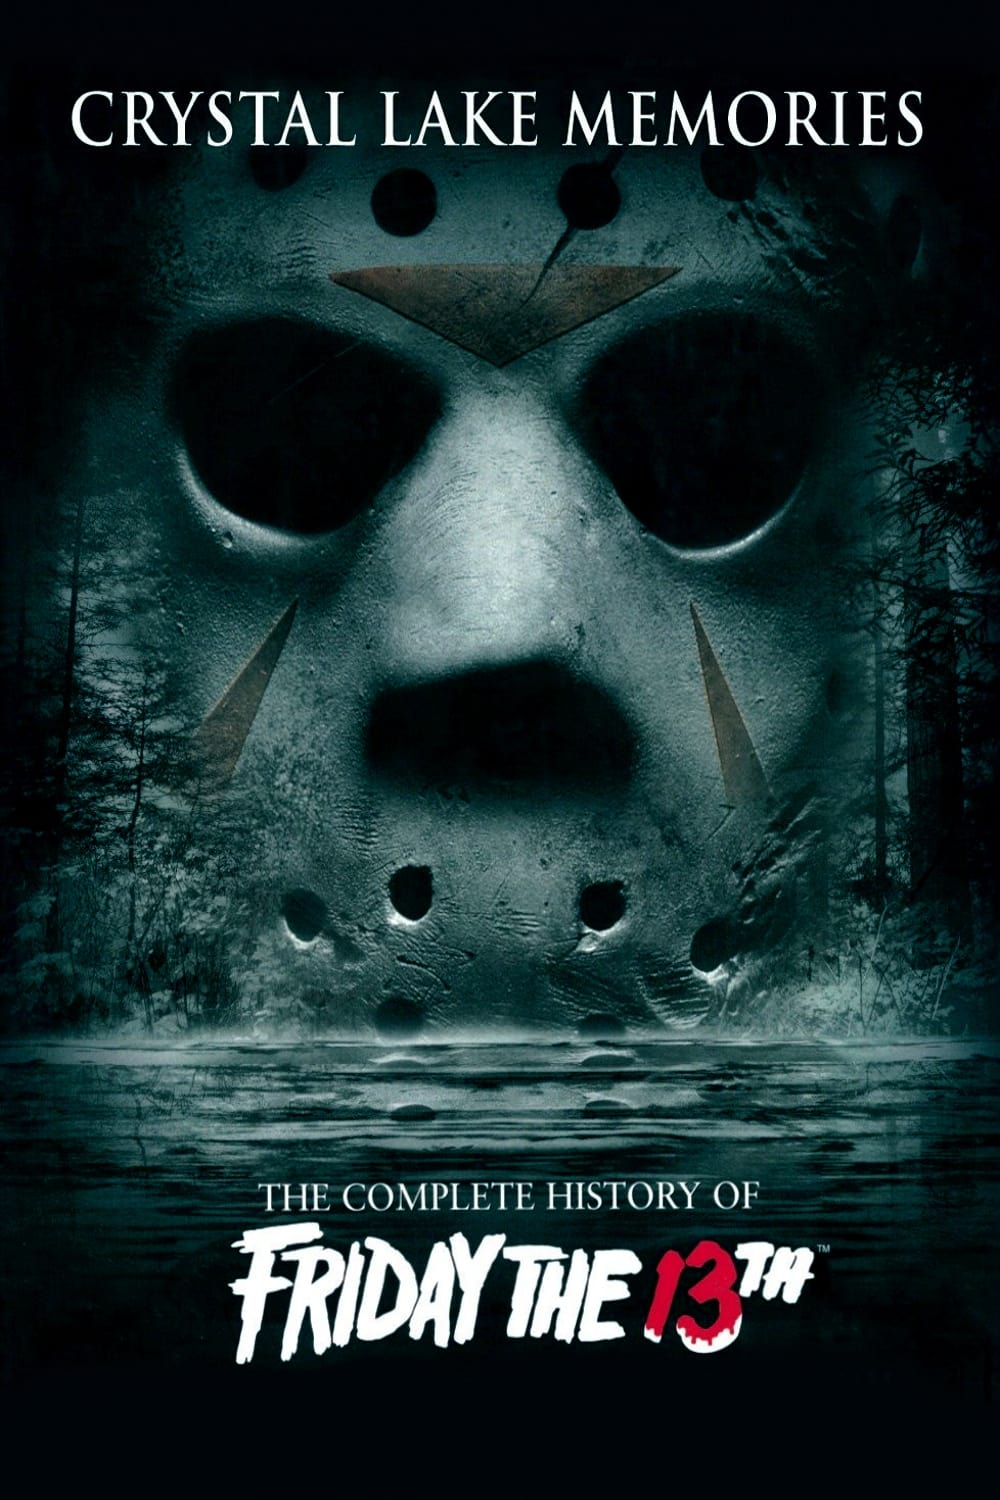 Crystal Lake Memories: The Complete History of Friday the 13th (2013)